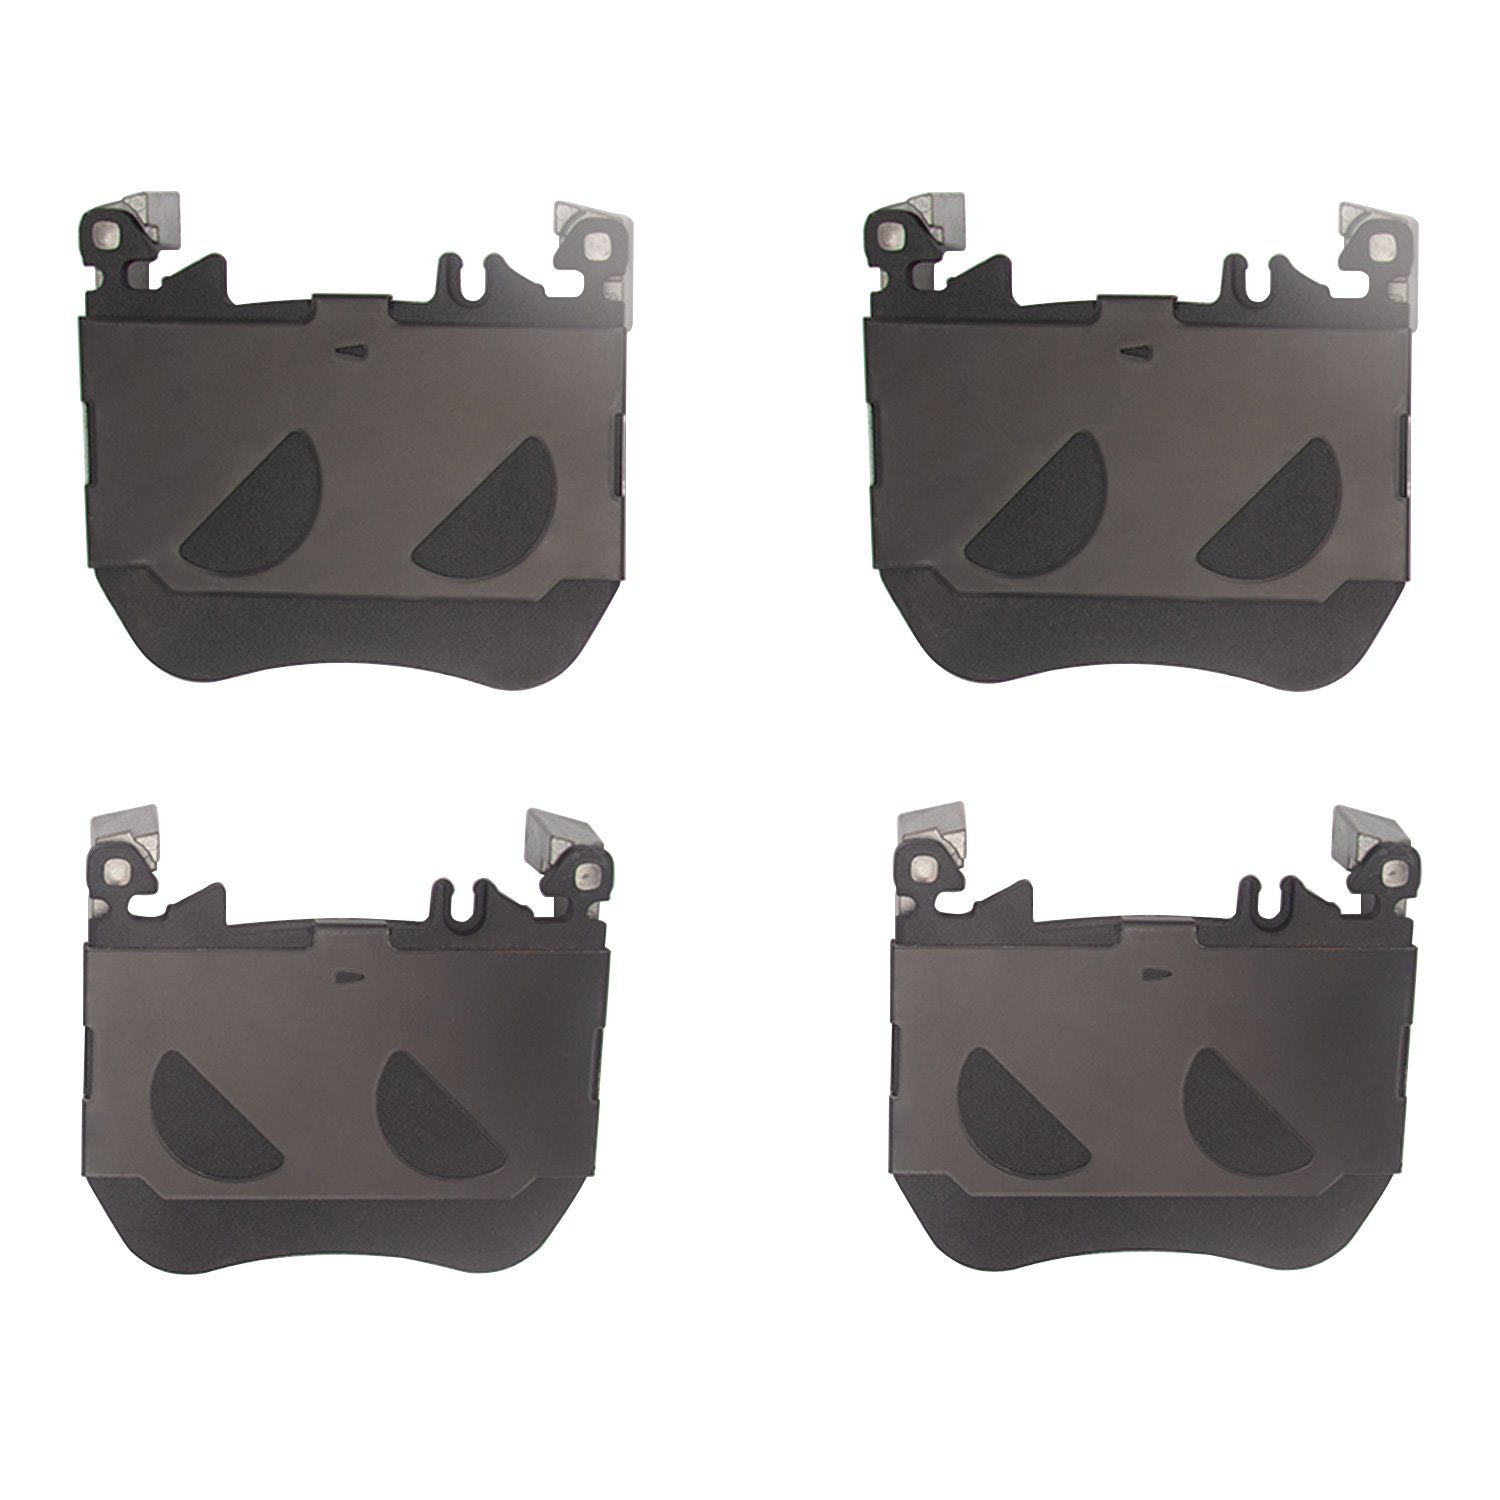 1600-2424-00 5000 Euro Ceramic Brake Pads, Fits Select Mercedes-Benz, Position: Front